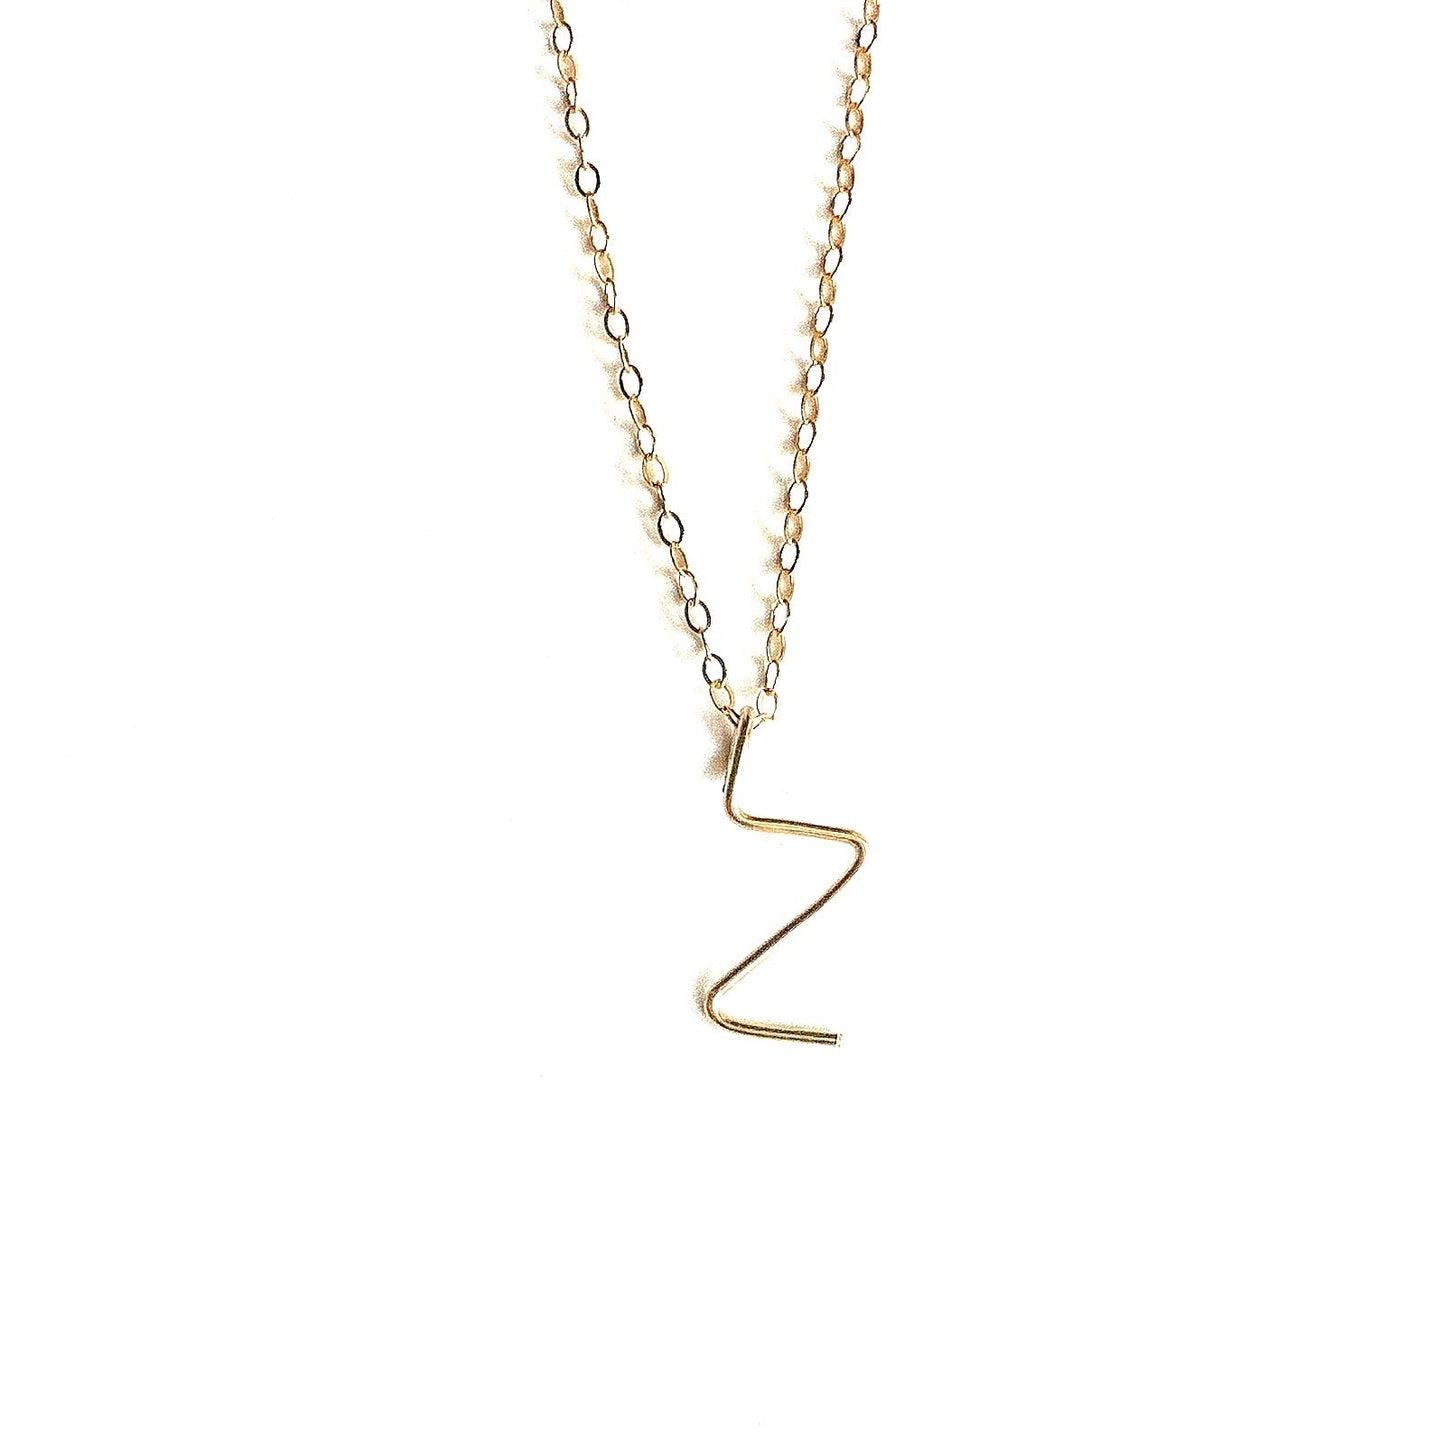 Handmade Initial Necklace Robyn Canady z 14K Gold Filled 